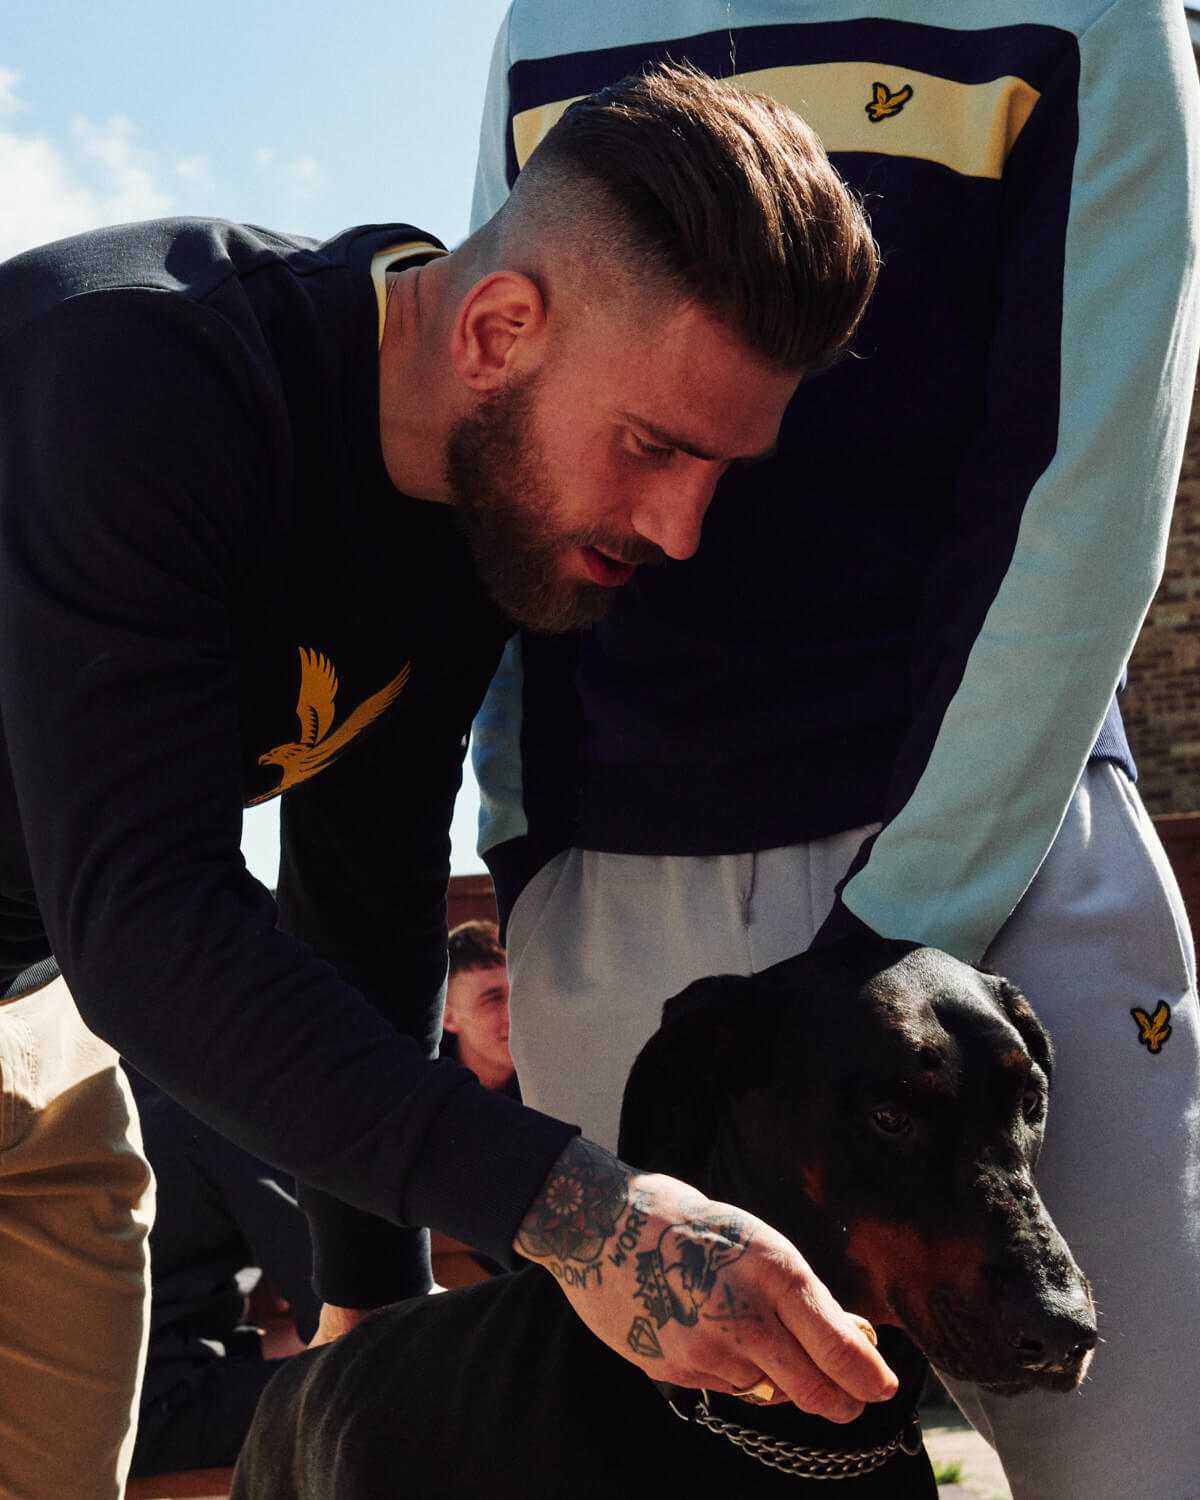 lad pets dog, by lifestyle photographer london